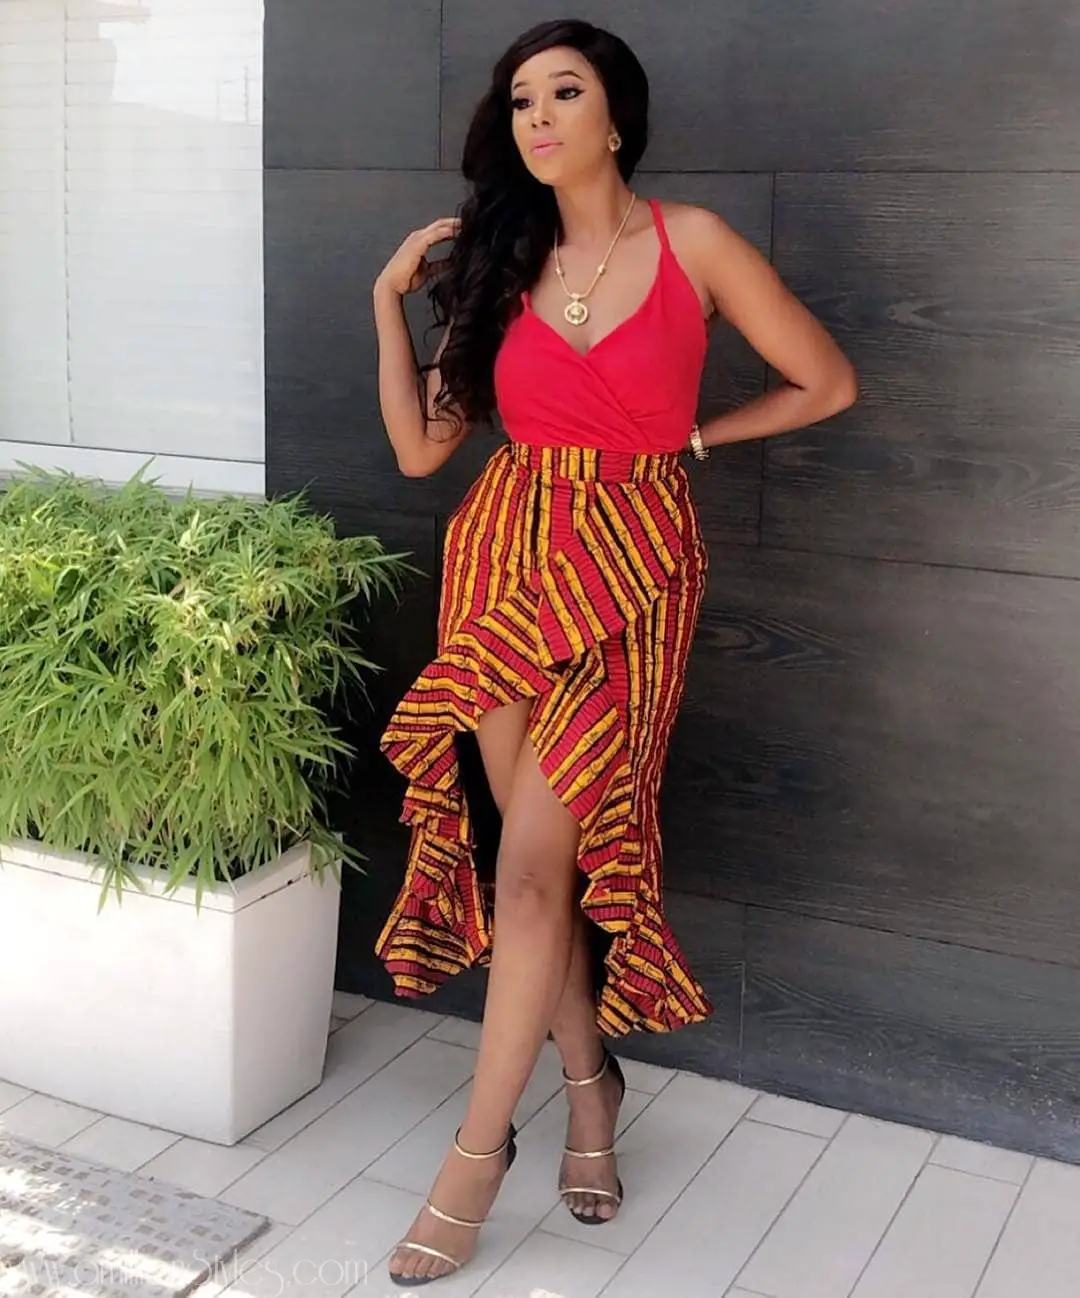 Love Skirts? These Hawt Ankara Skirts Are Just Right!